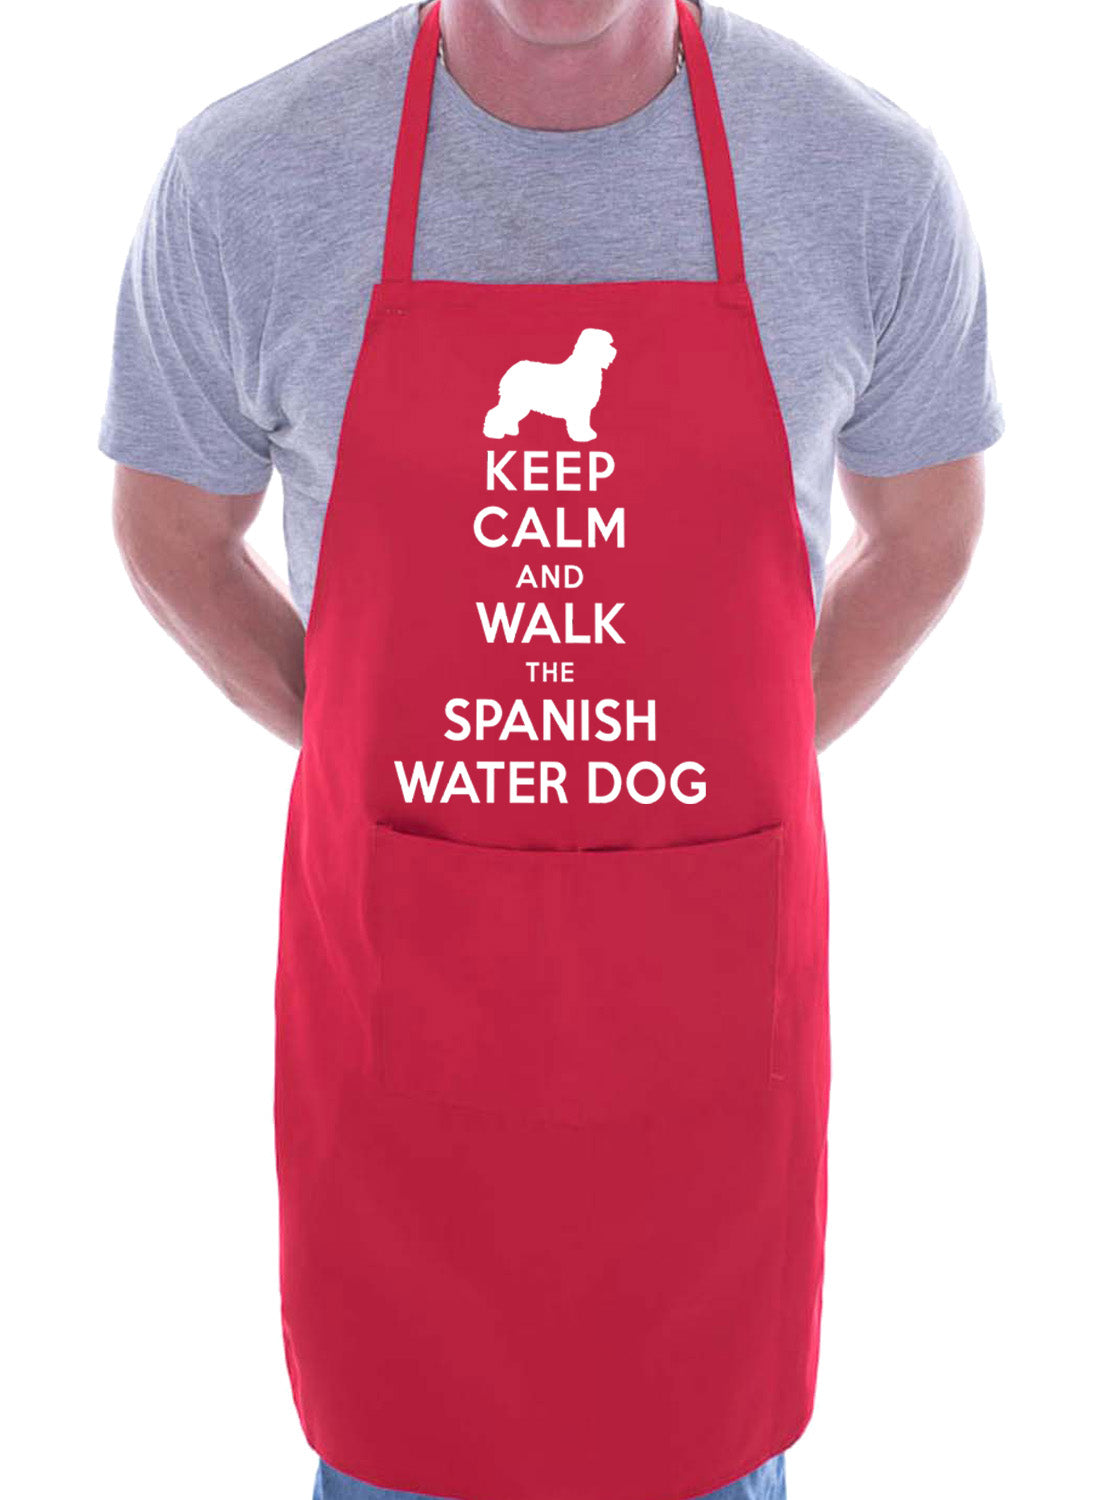 Keep Calm and Walk Spanish Water Dog BBQ Cooking Apron